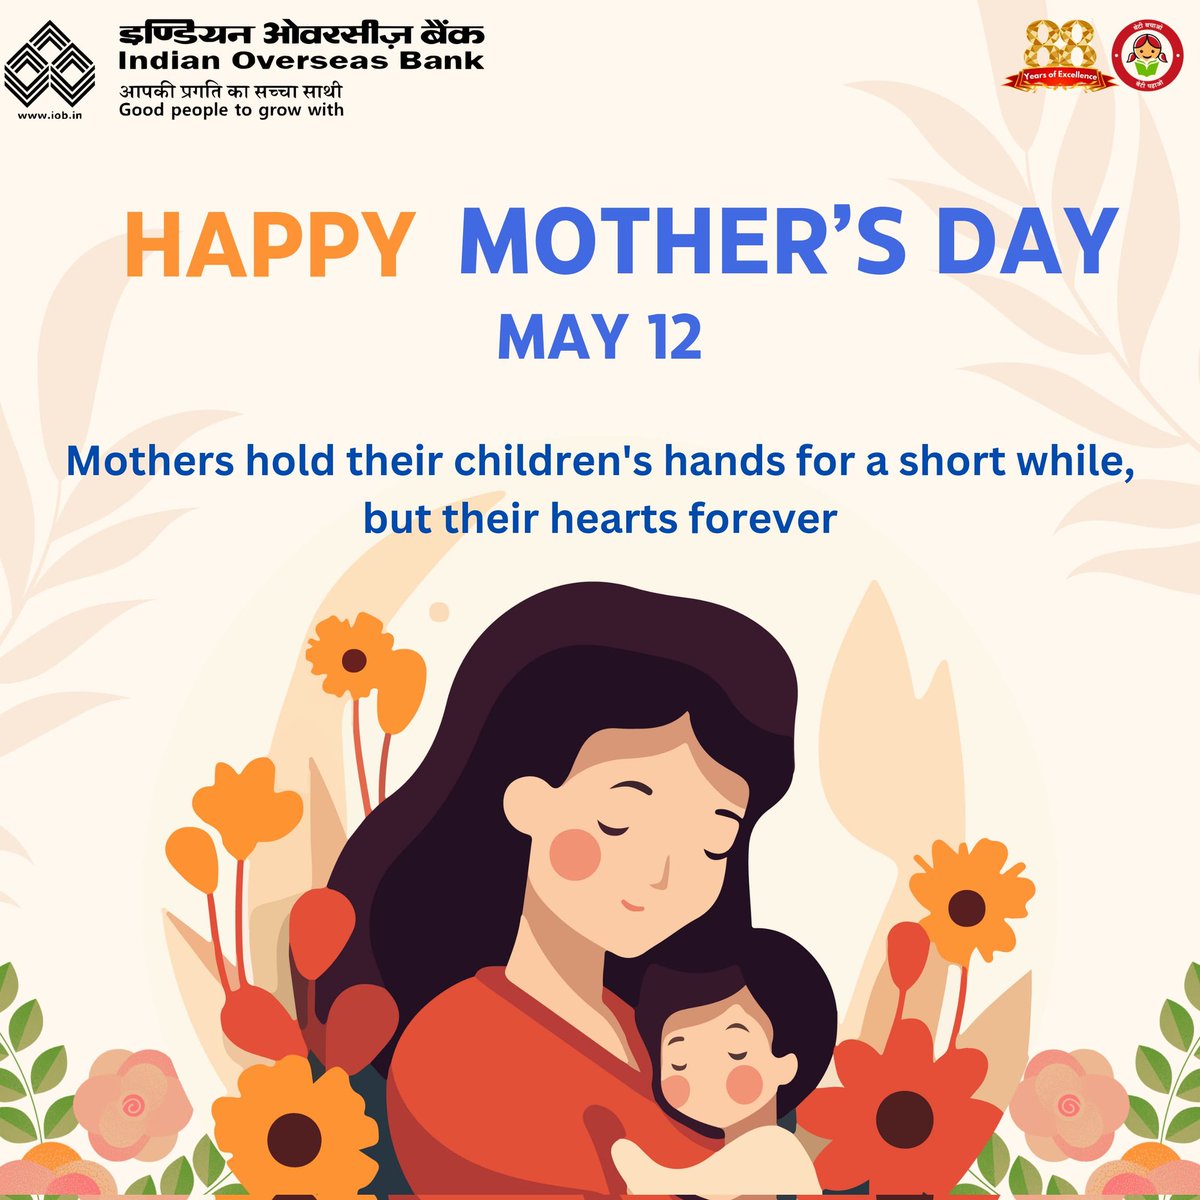 Indian Overseas Bank celebrates the strength and love of all the wonderful mothers out there. Wishing you a Mother’s Day filled with the same love and care you generously give every day!! #mothersday #happymothersday #IOB #IndianOverseasBank #DFS #RBI